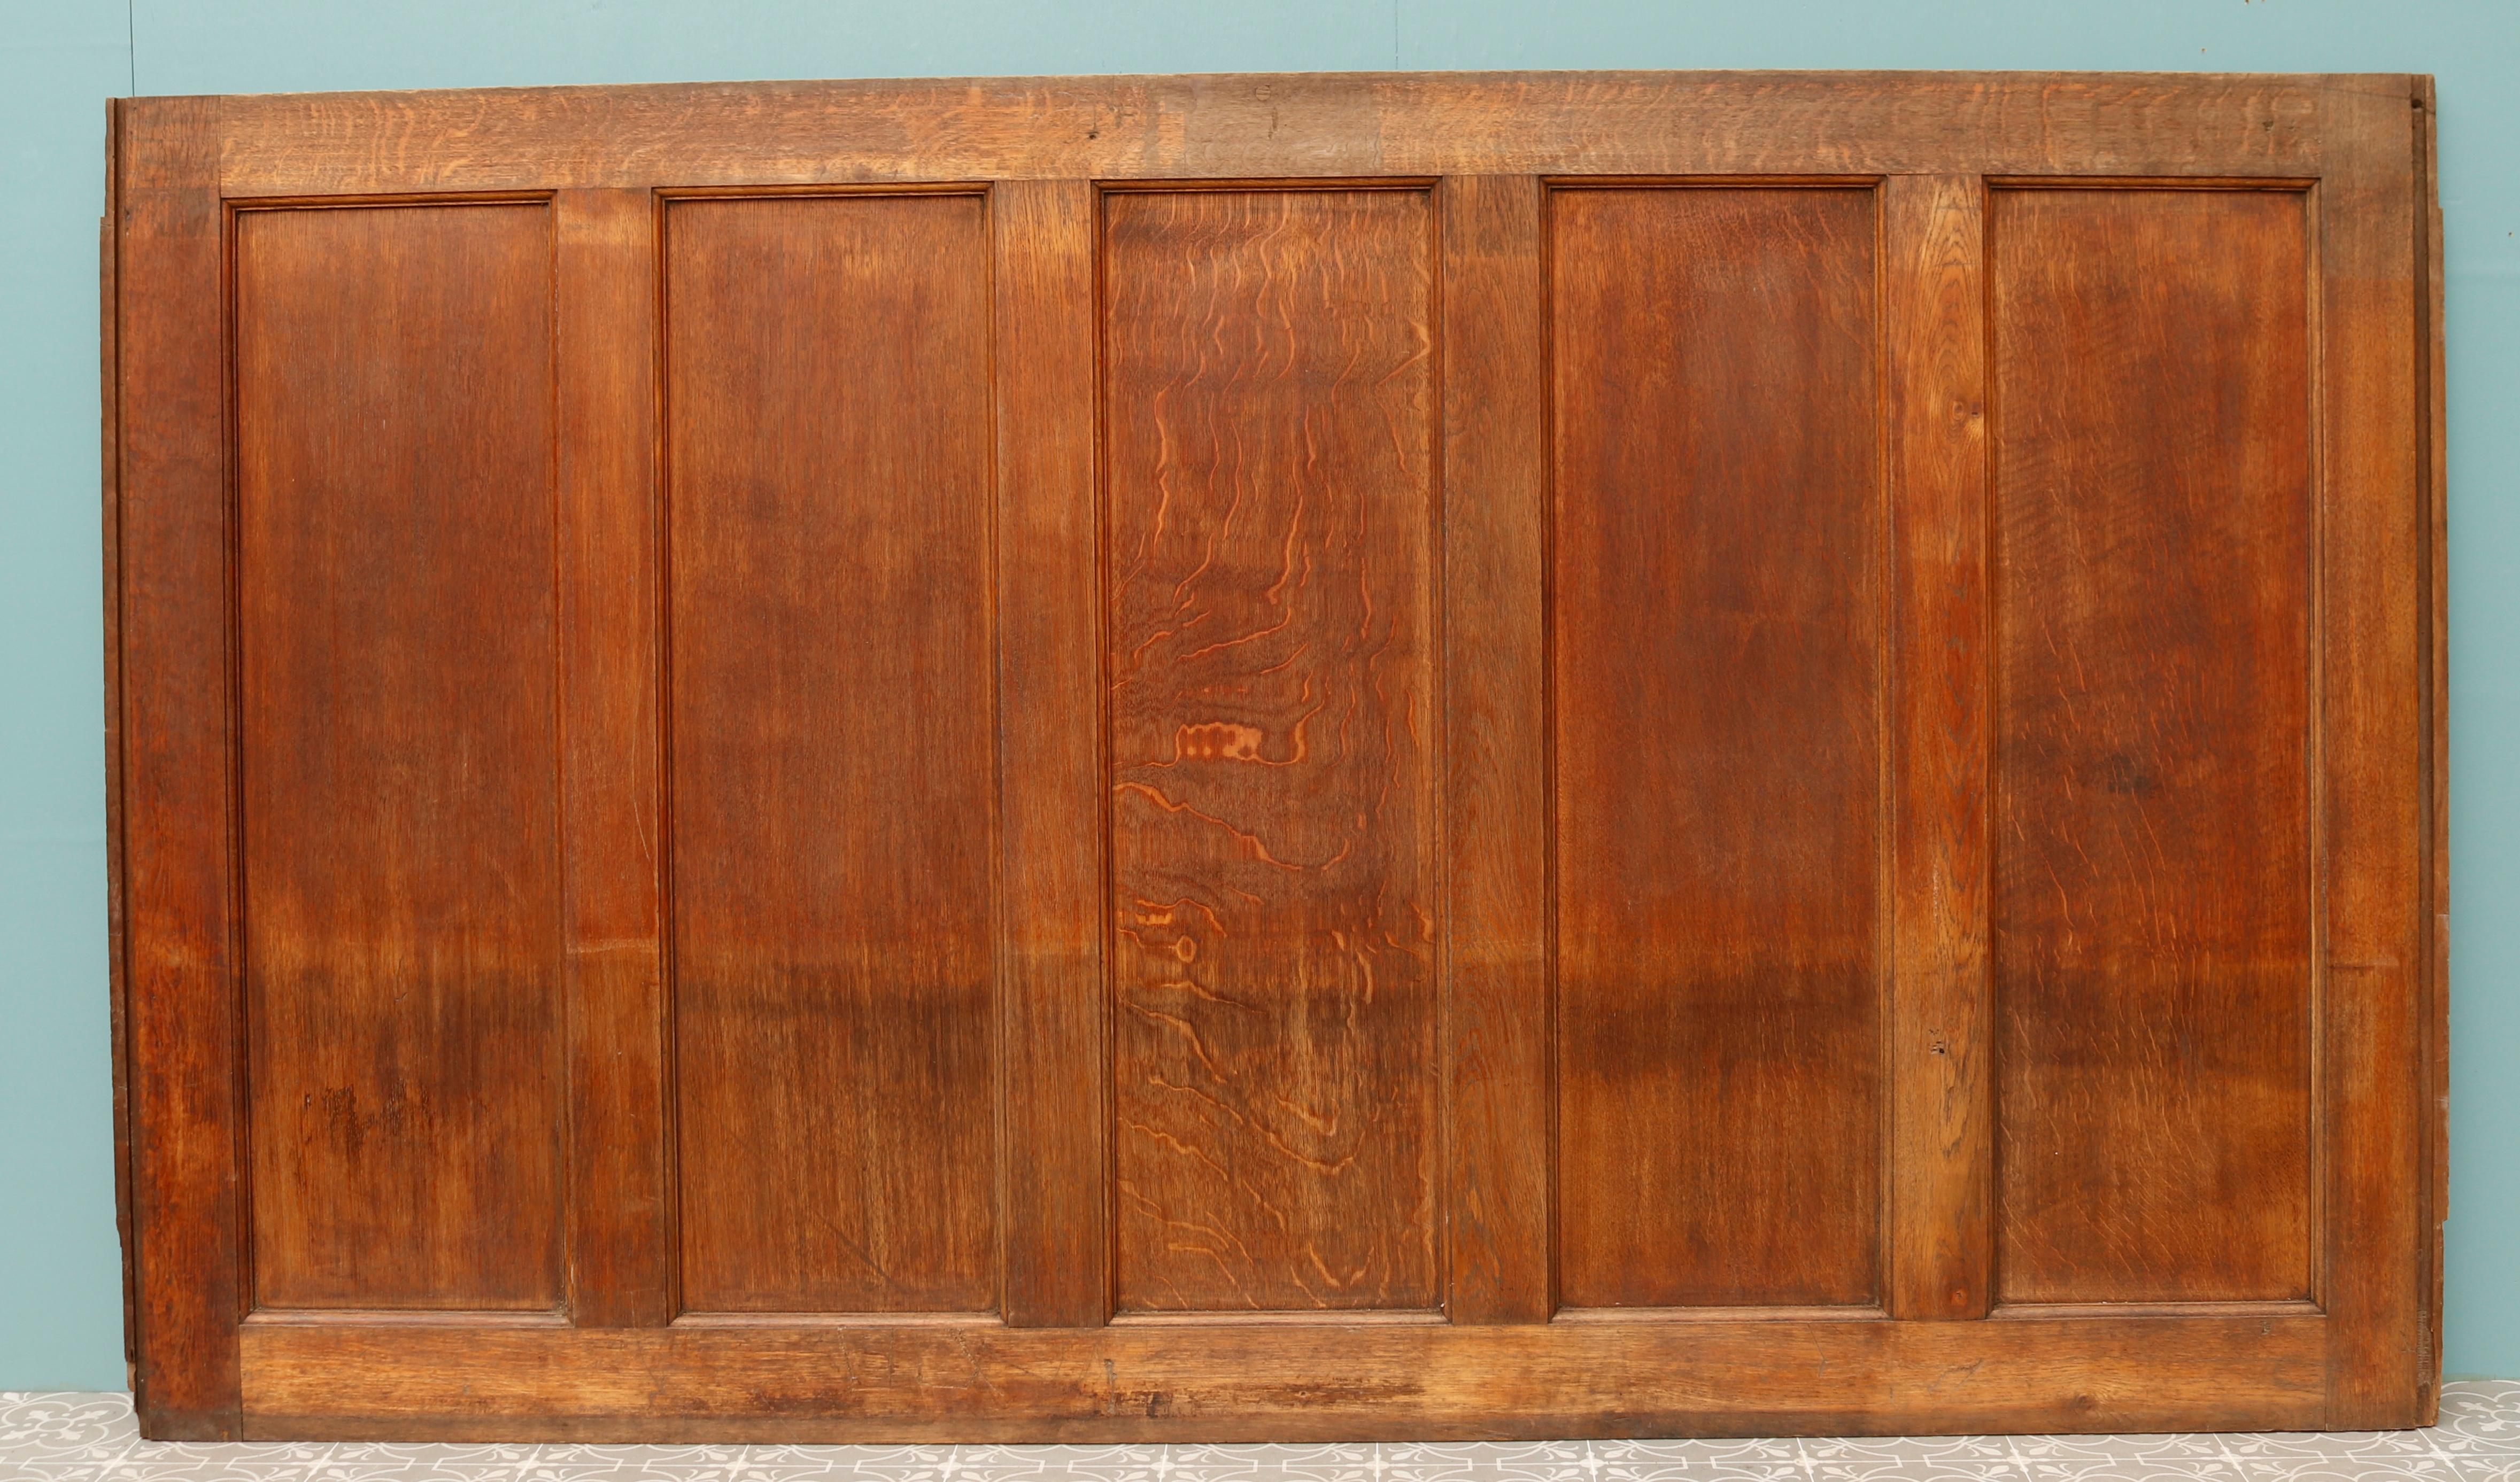 A 9.3m run of dado height oak wall panelling, in four sections.

Additional Dimensions

Widths 245, 244, 221 and 220 cm.